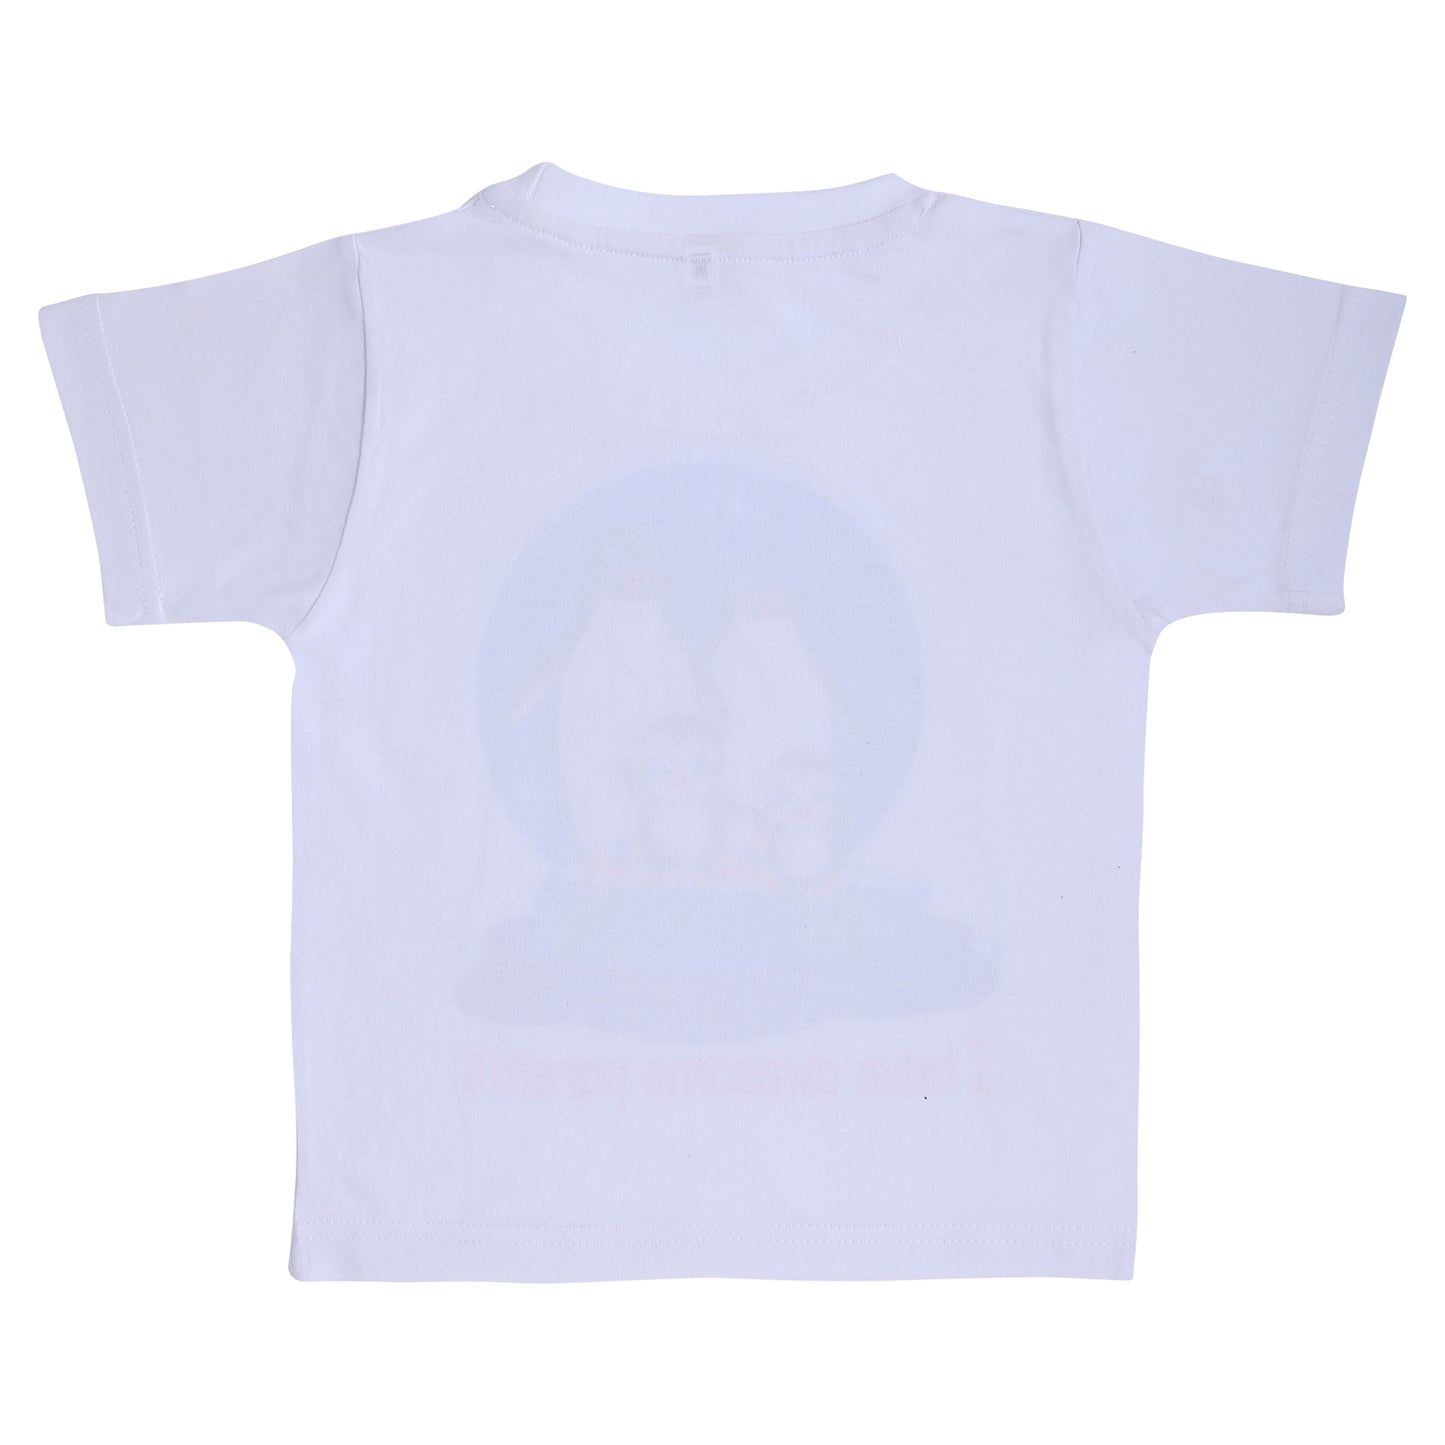 NEO GARMENTS Kids Unisex Round Neck Printed Cotton T-shirt - I HAVE AWESOME PARENTS. | SIZE FROM 1 YRS TO 7 YRS.